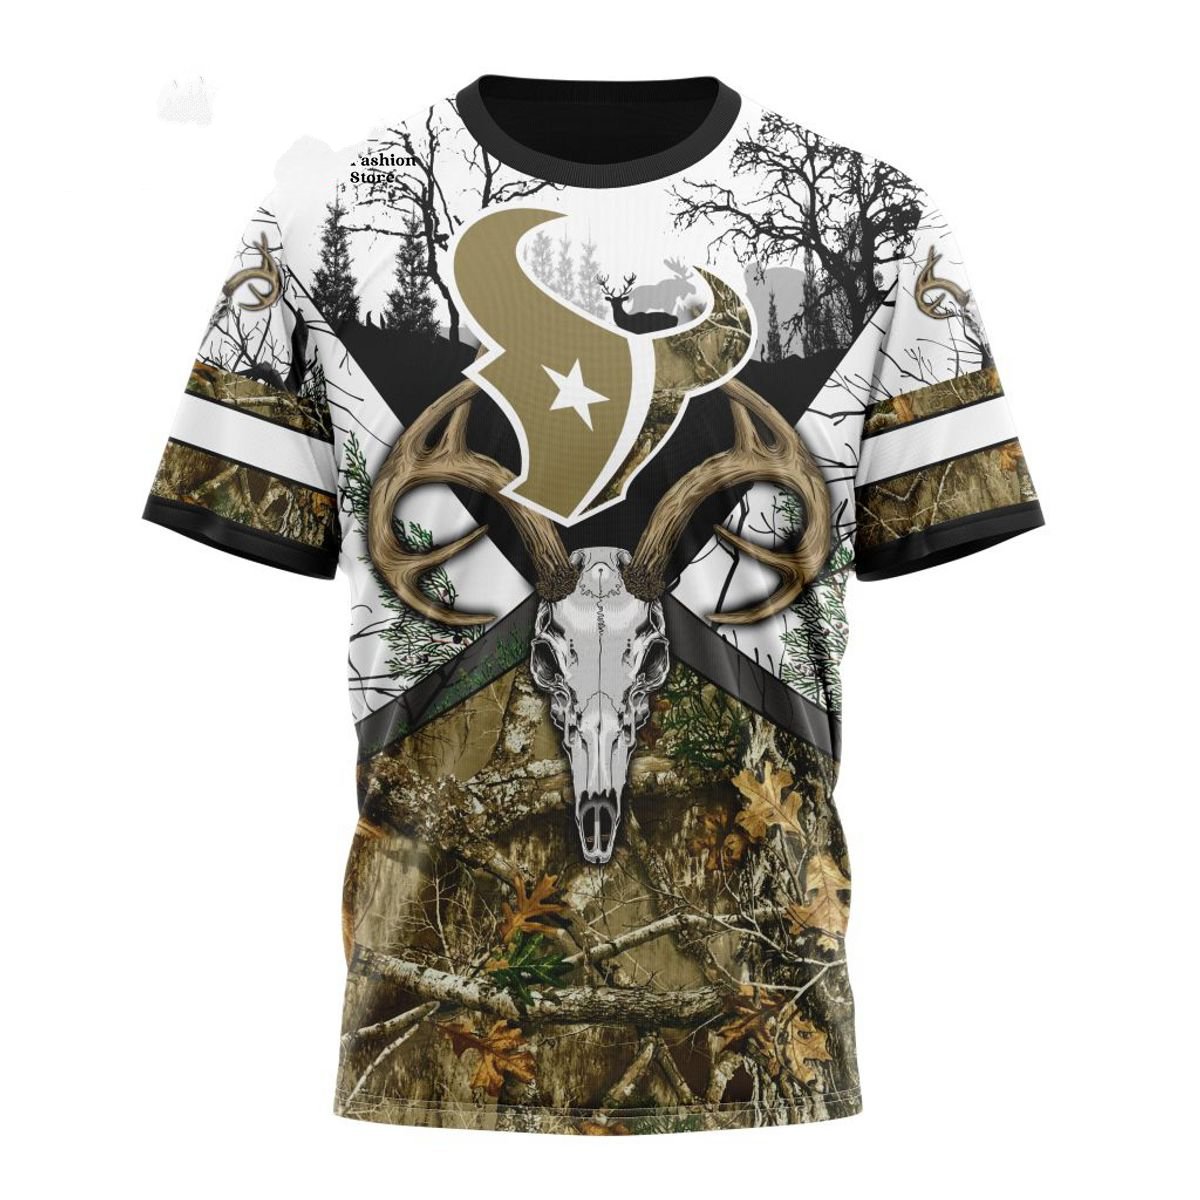 HOUSTON TEXANS DEER SKULL AND FOREST 3D HOODIE